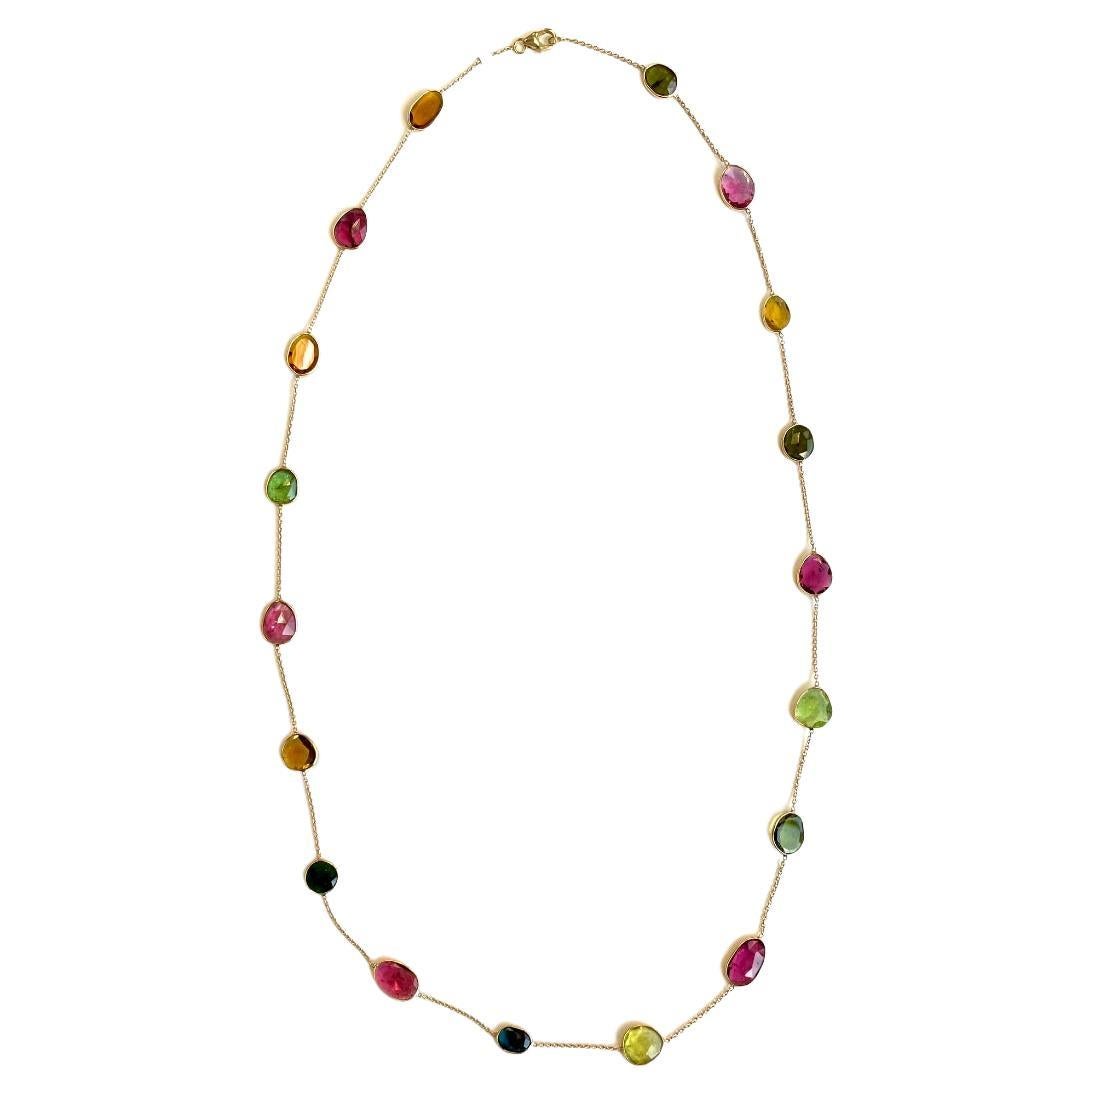 Nari Fine Jewels Handcrafted Tourmaline Slice Station Necklace in 18k Yellow